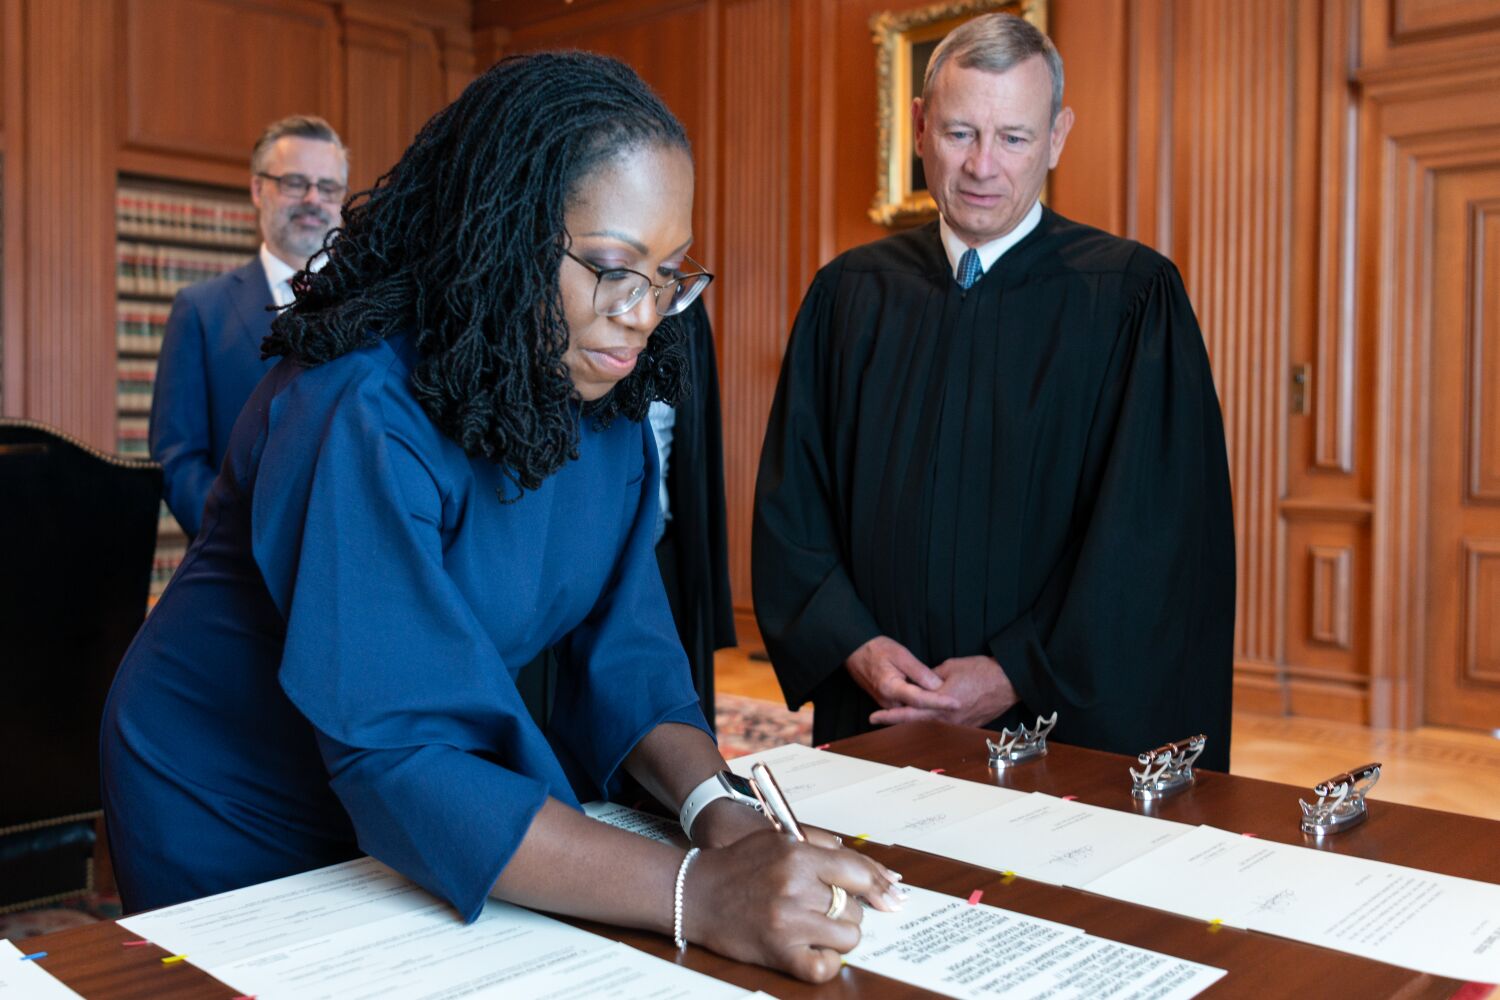 Joined by first Black lady on Supreme Court docket, justices to deal